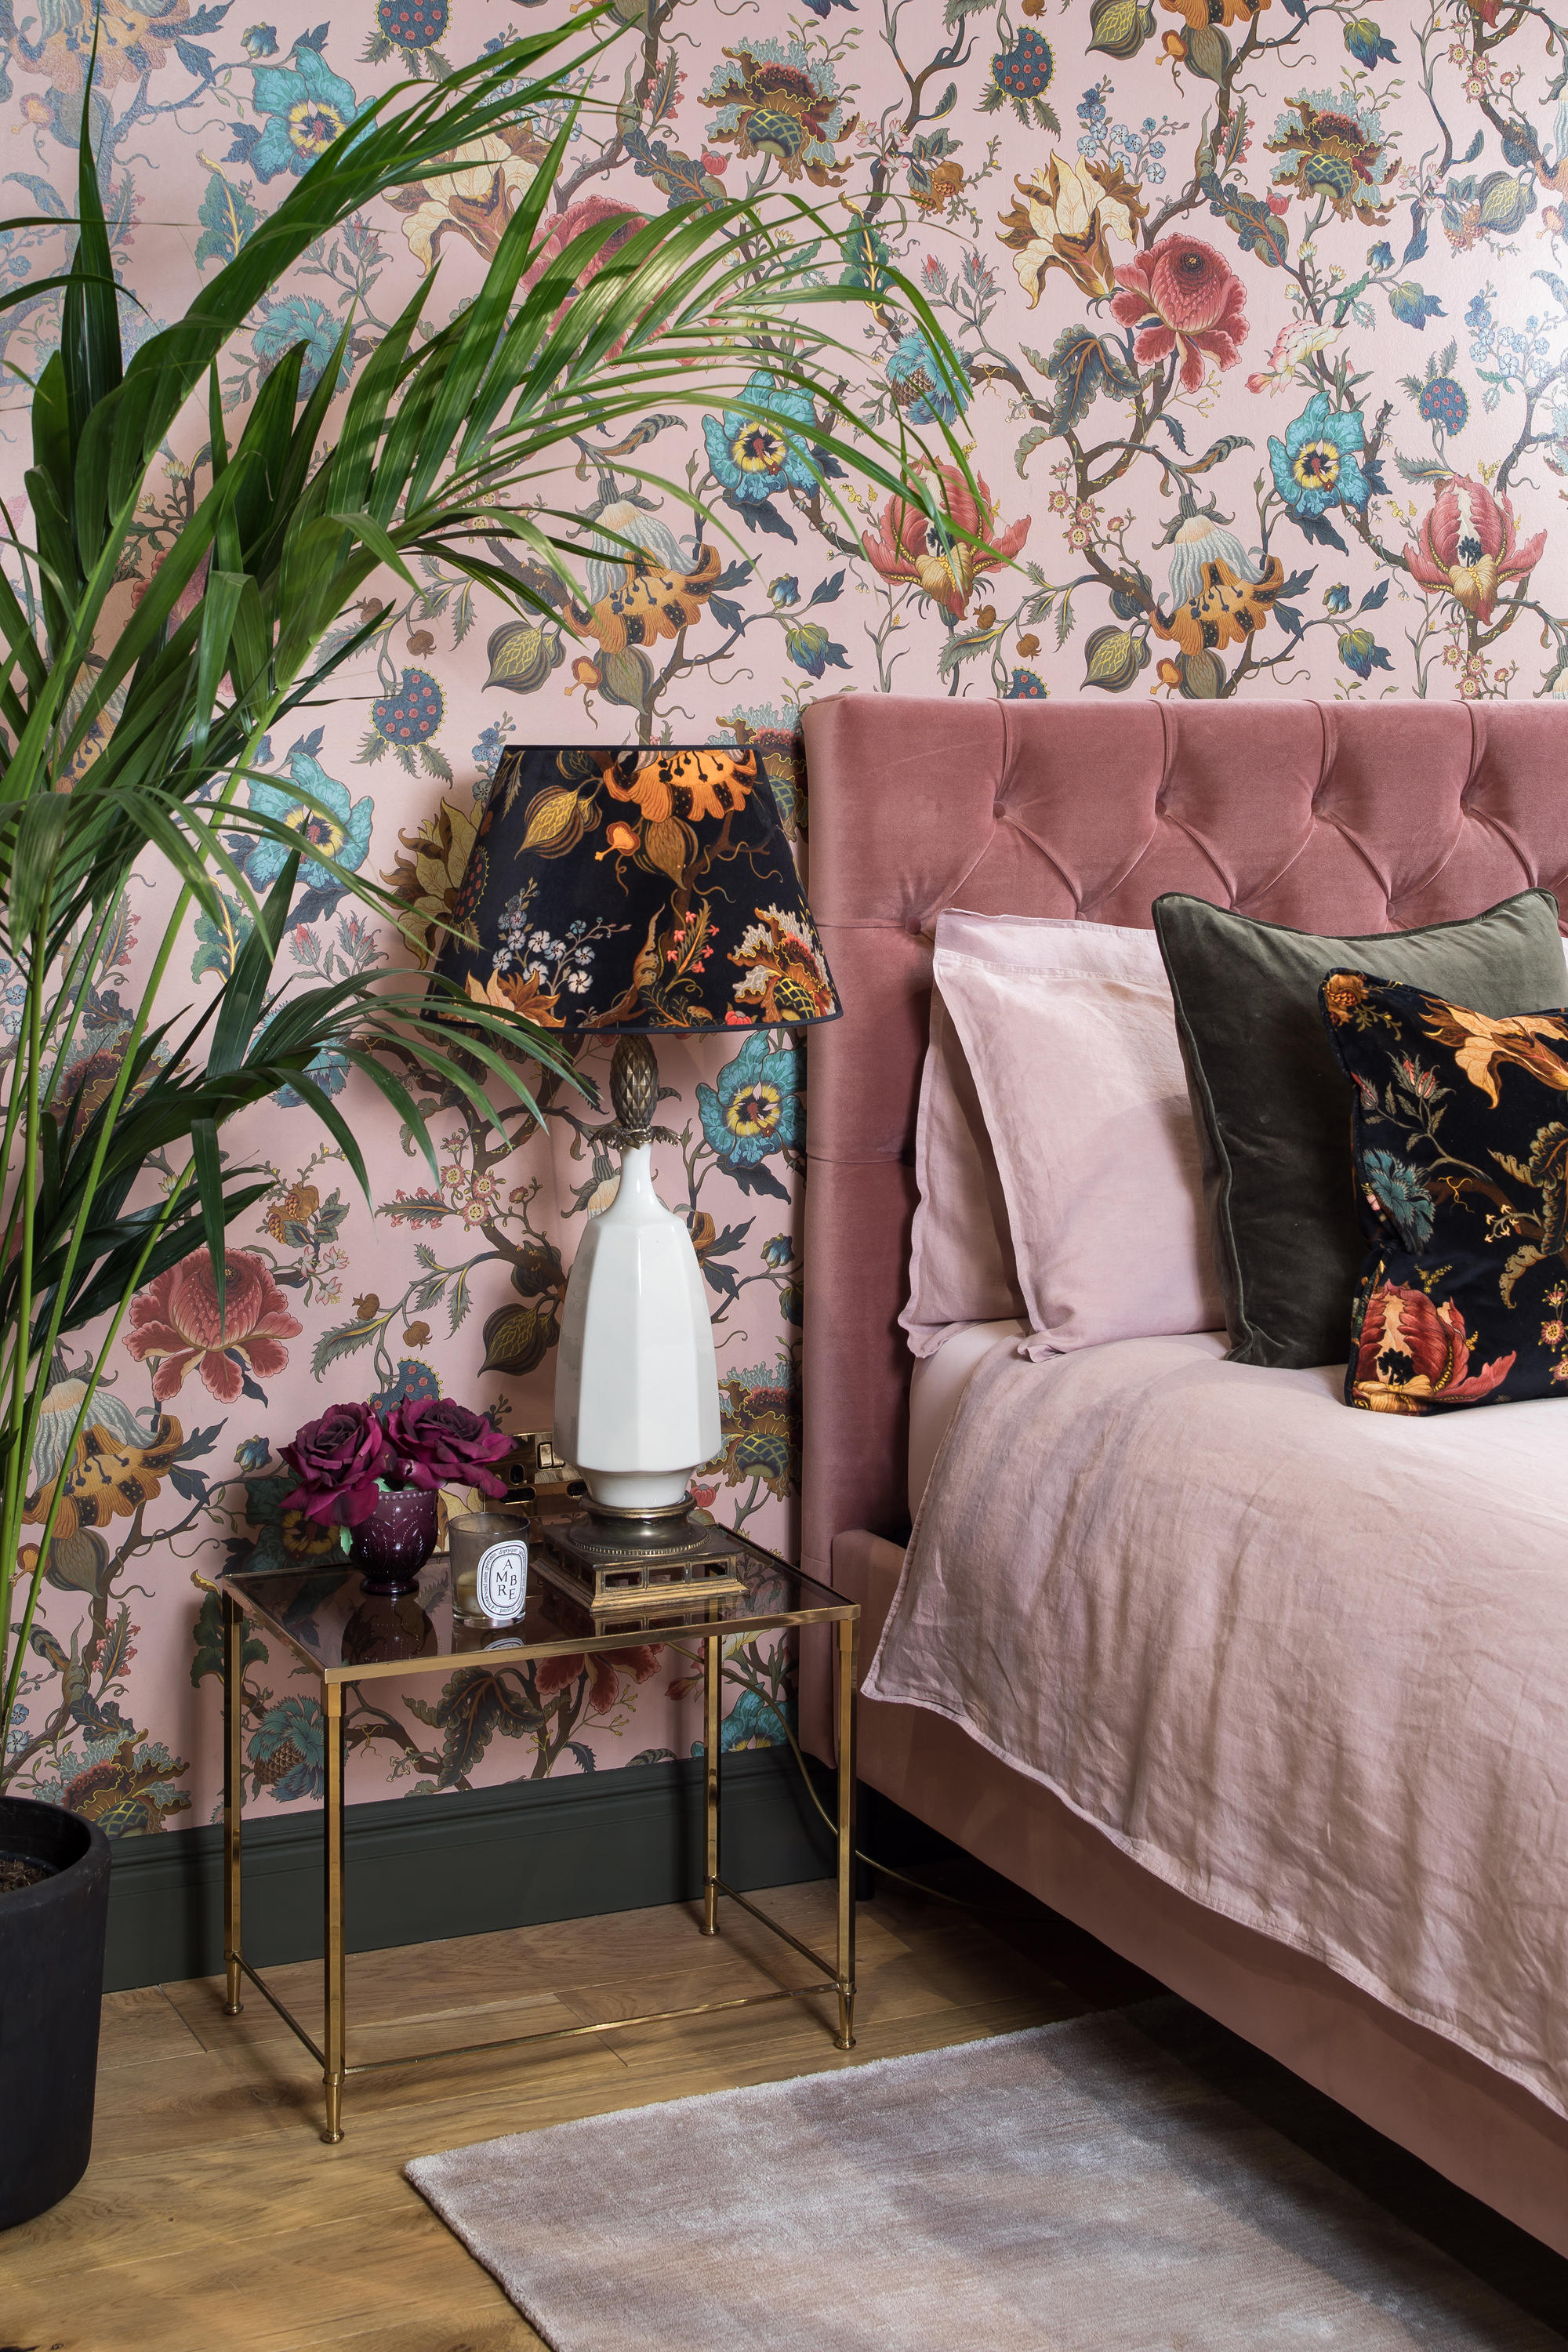 House of Hackneys Collaboration With Cult Wallpaper Brand Zuber Arrives at  Bergdorf Goodman  Vogue